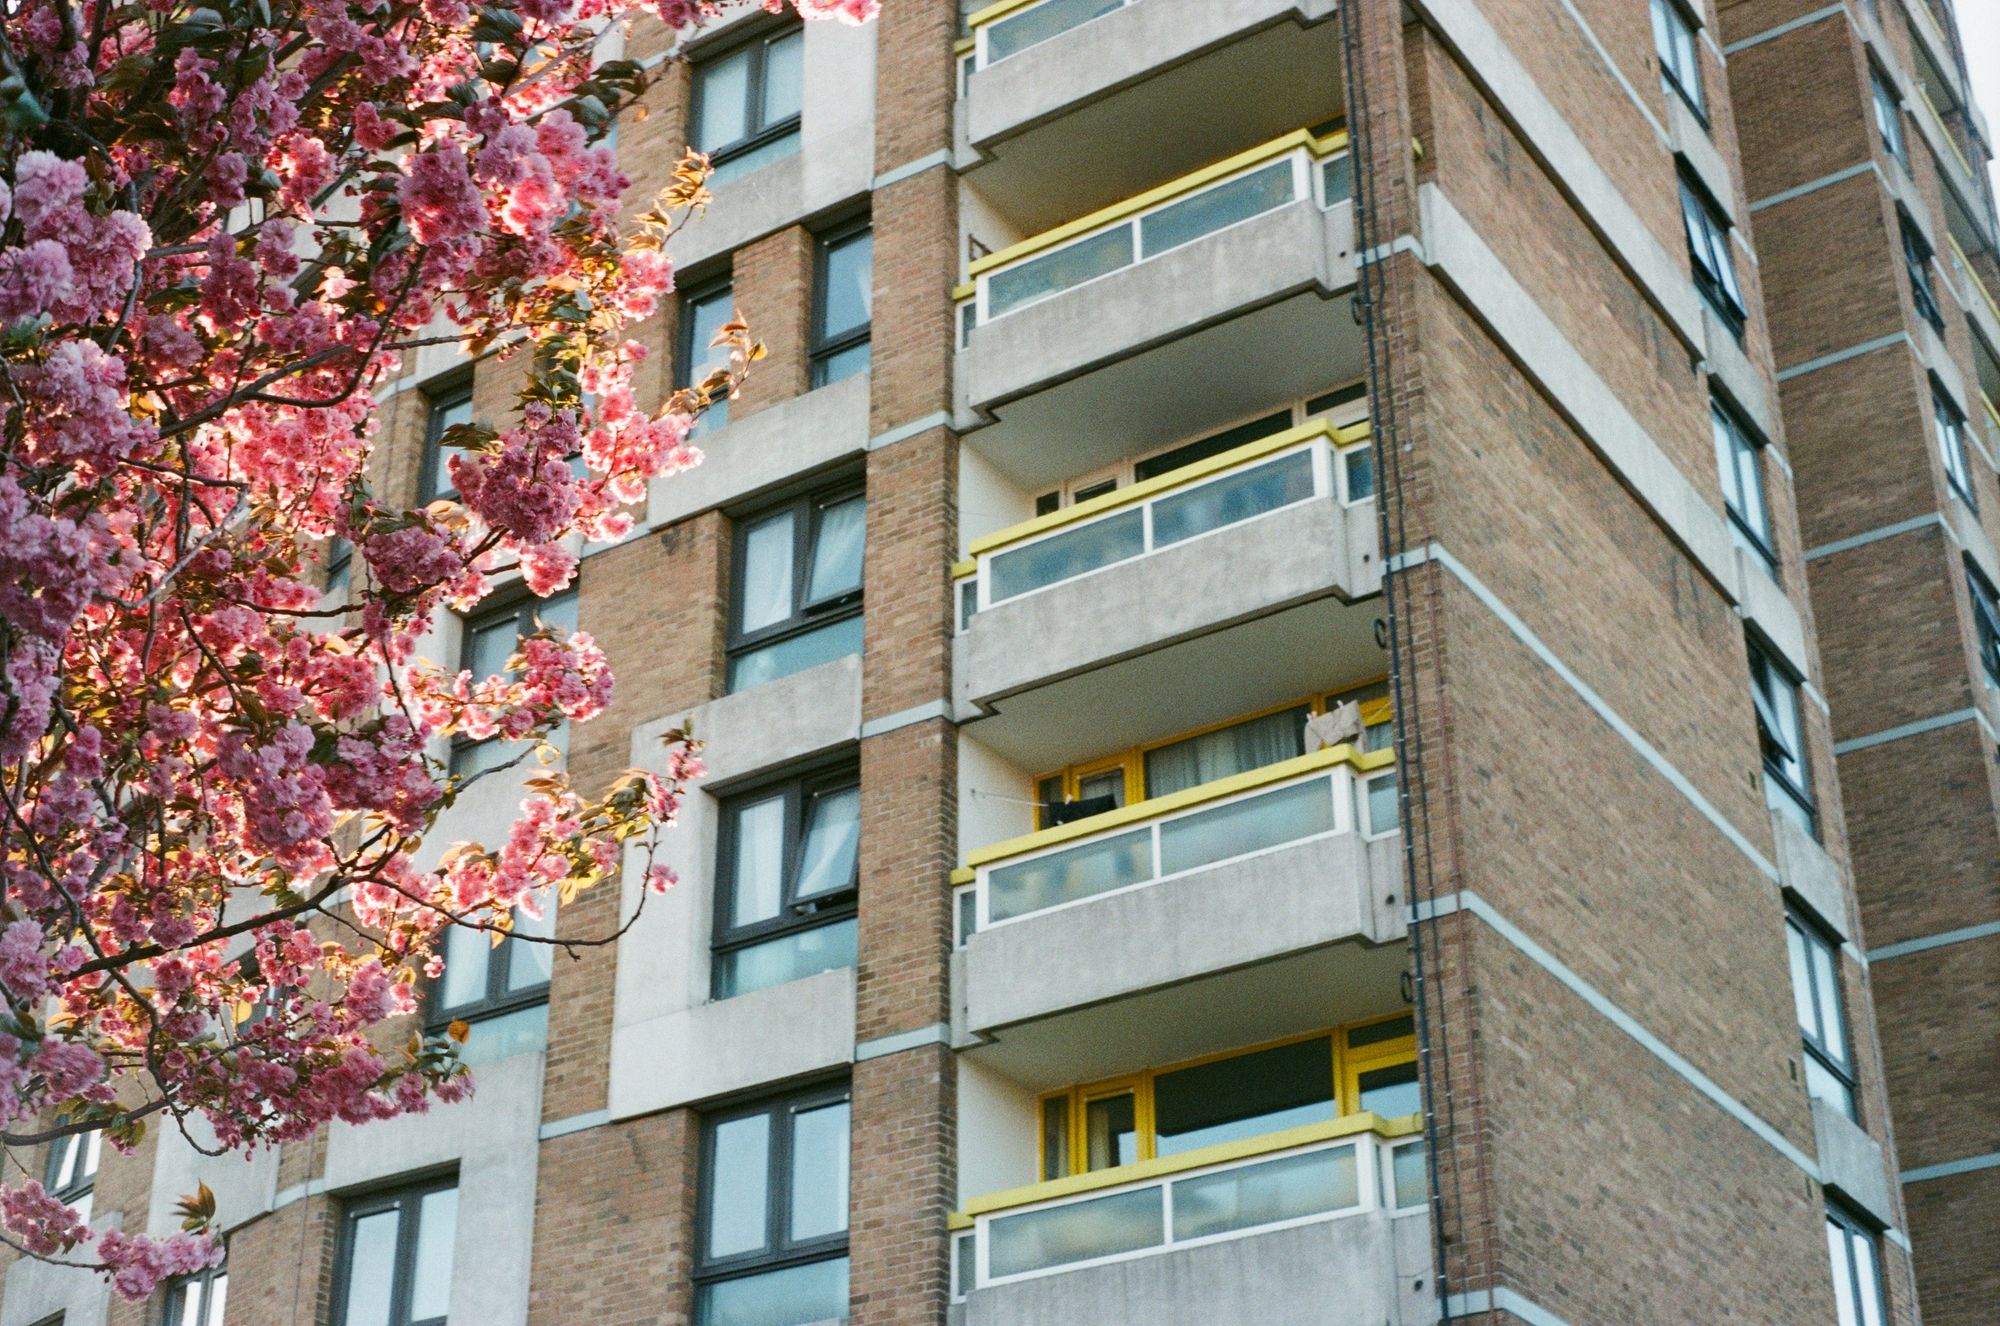 A brick block of flats with concrete balconies. A tree in a fluffy pink blossom, lit by golden-hour sun, creeps towards the balconies.